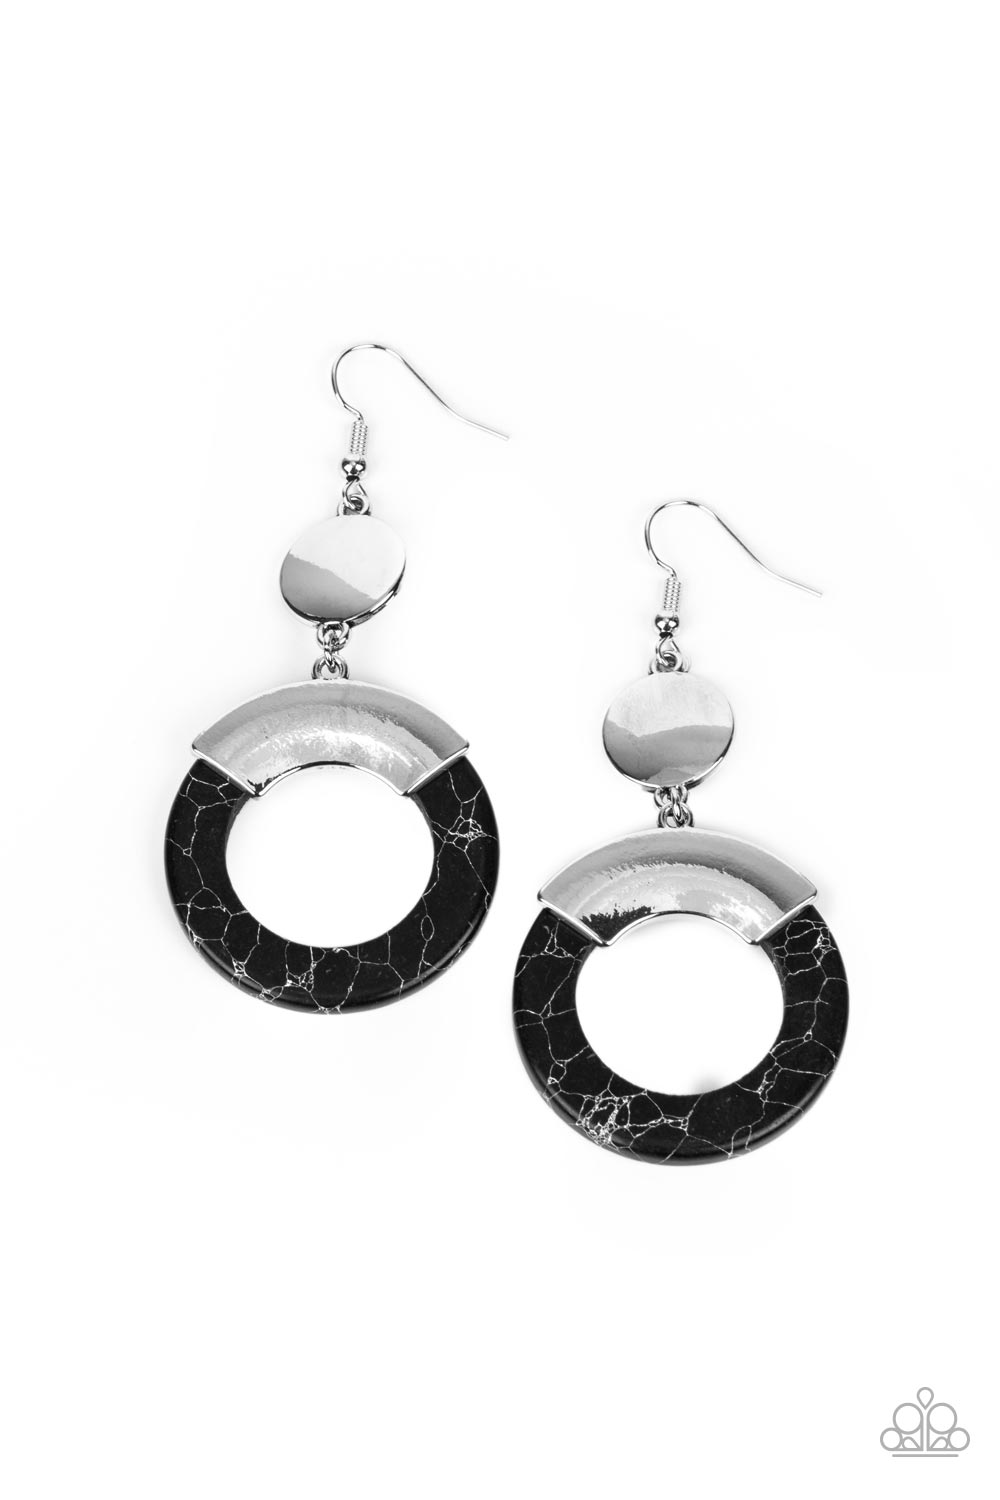 ENTRADA at Your Own Risk Black Earring - Paparazzi Accessories  Capped in a curved silver plate, an earthy black stone hoop swings from the bottom of a shiny silver disc for an authentic artisan twist. Earring attaches to a standard fishhook fitting.  Sold as one pair of earrings.